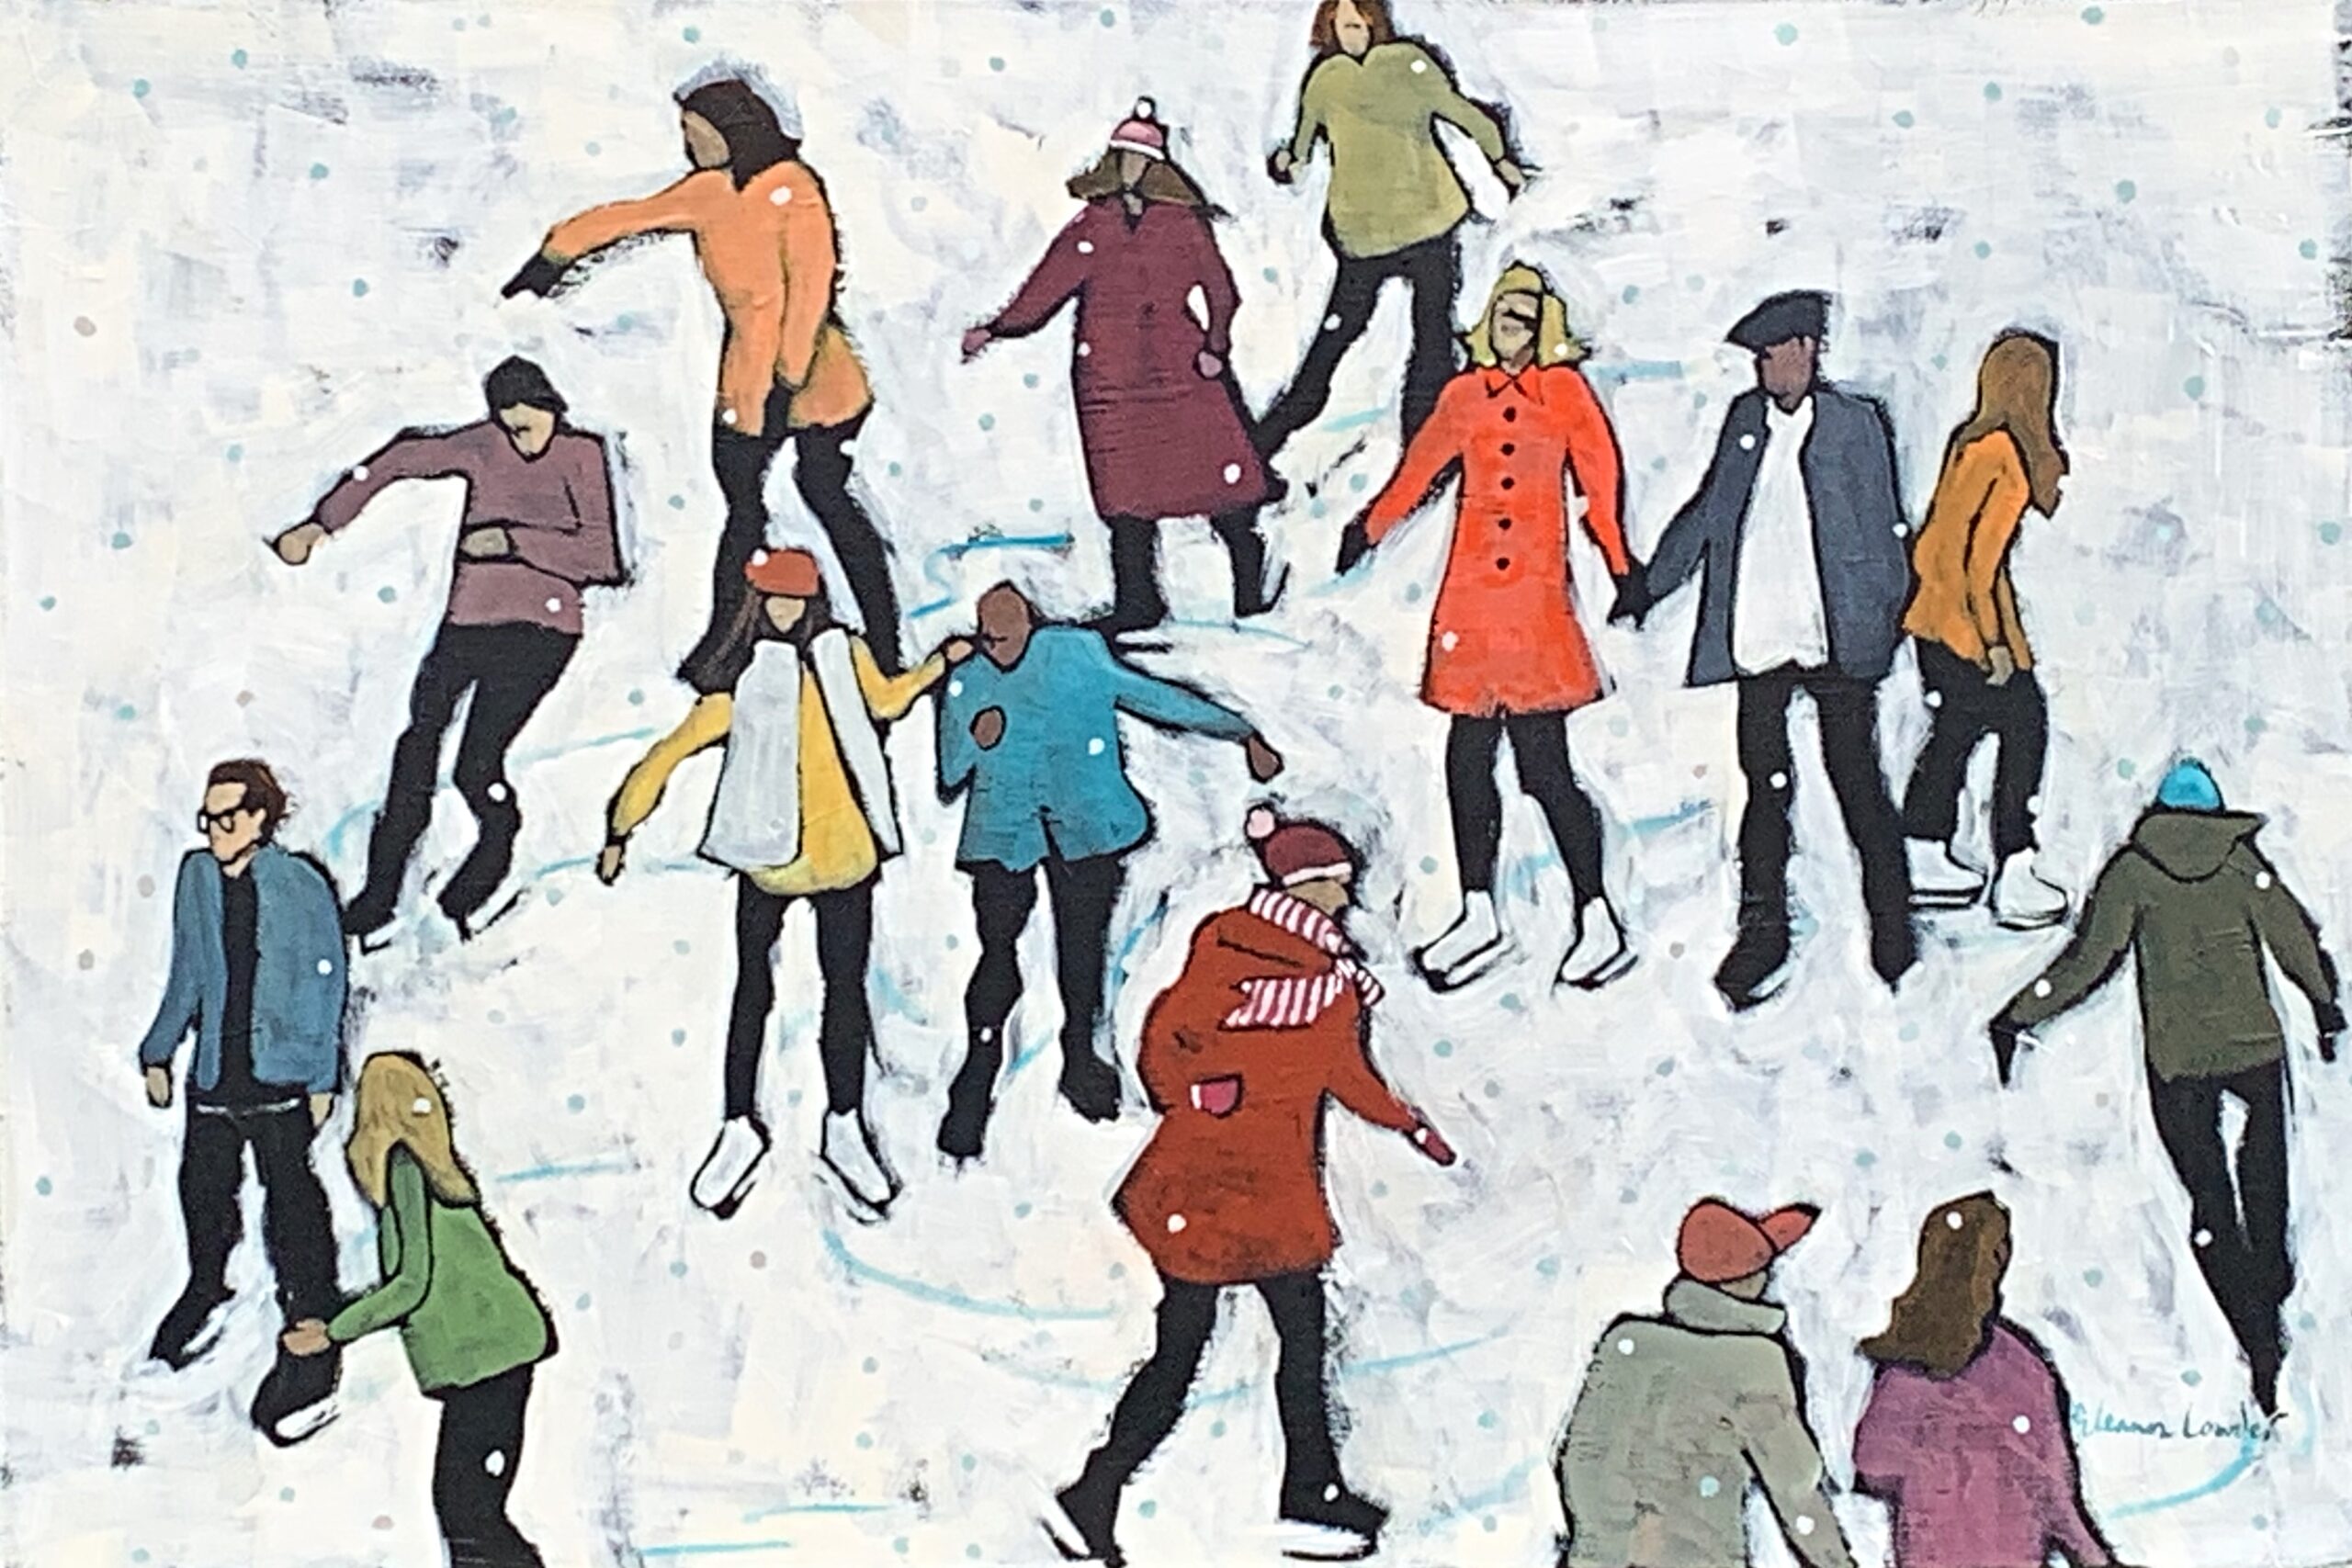 Practice Makes Perfect, original acrylic ice skating on the White Way painting by Eleanor Lowden at Effusion Art Gallery in Invermere, BC